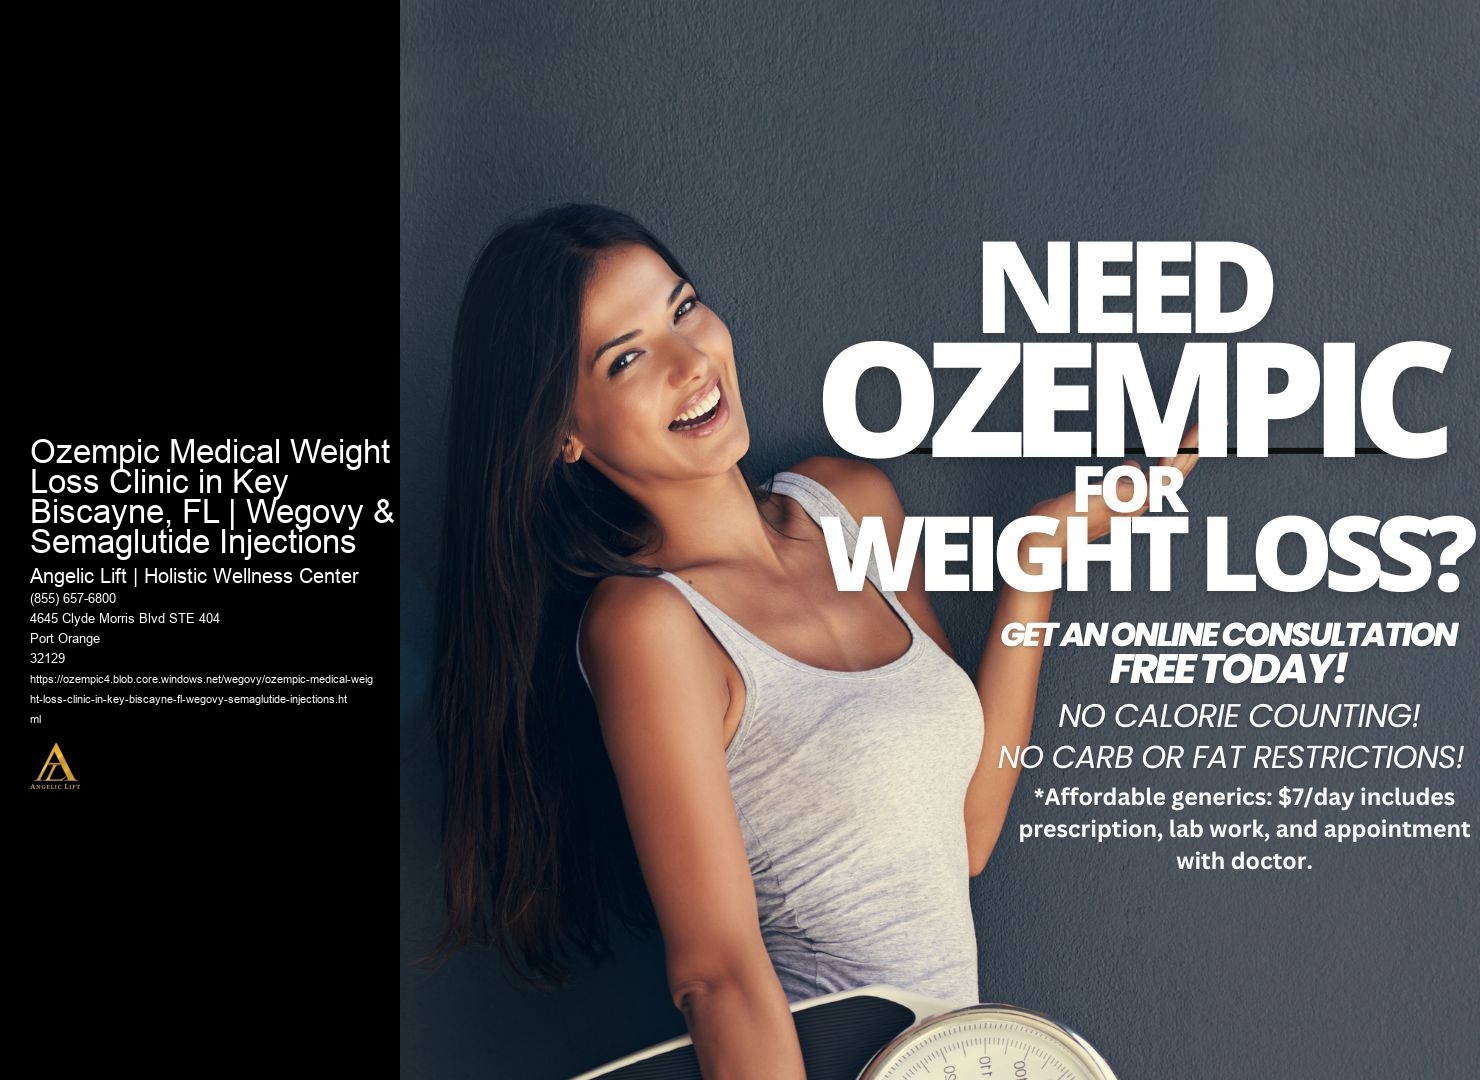 Ozempic Medical Weight Loss Clinic in Key Biscayne, FL | Wegovy & Semaglutide Injections